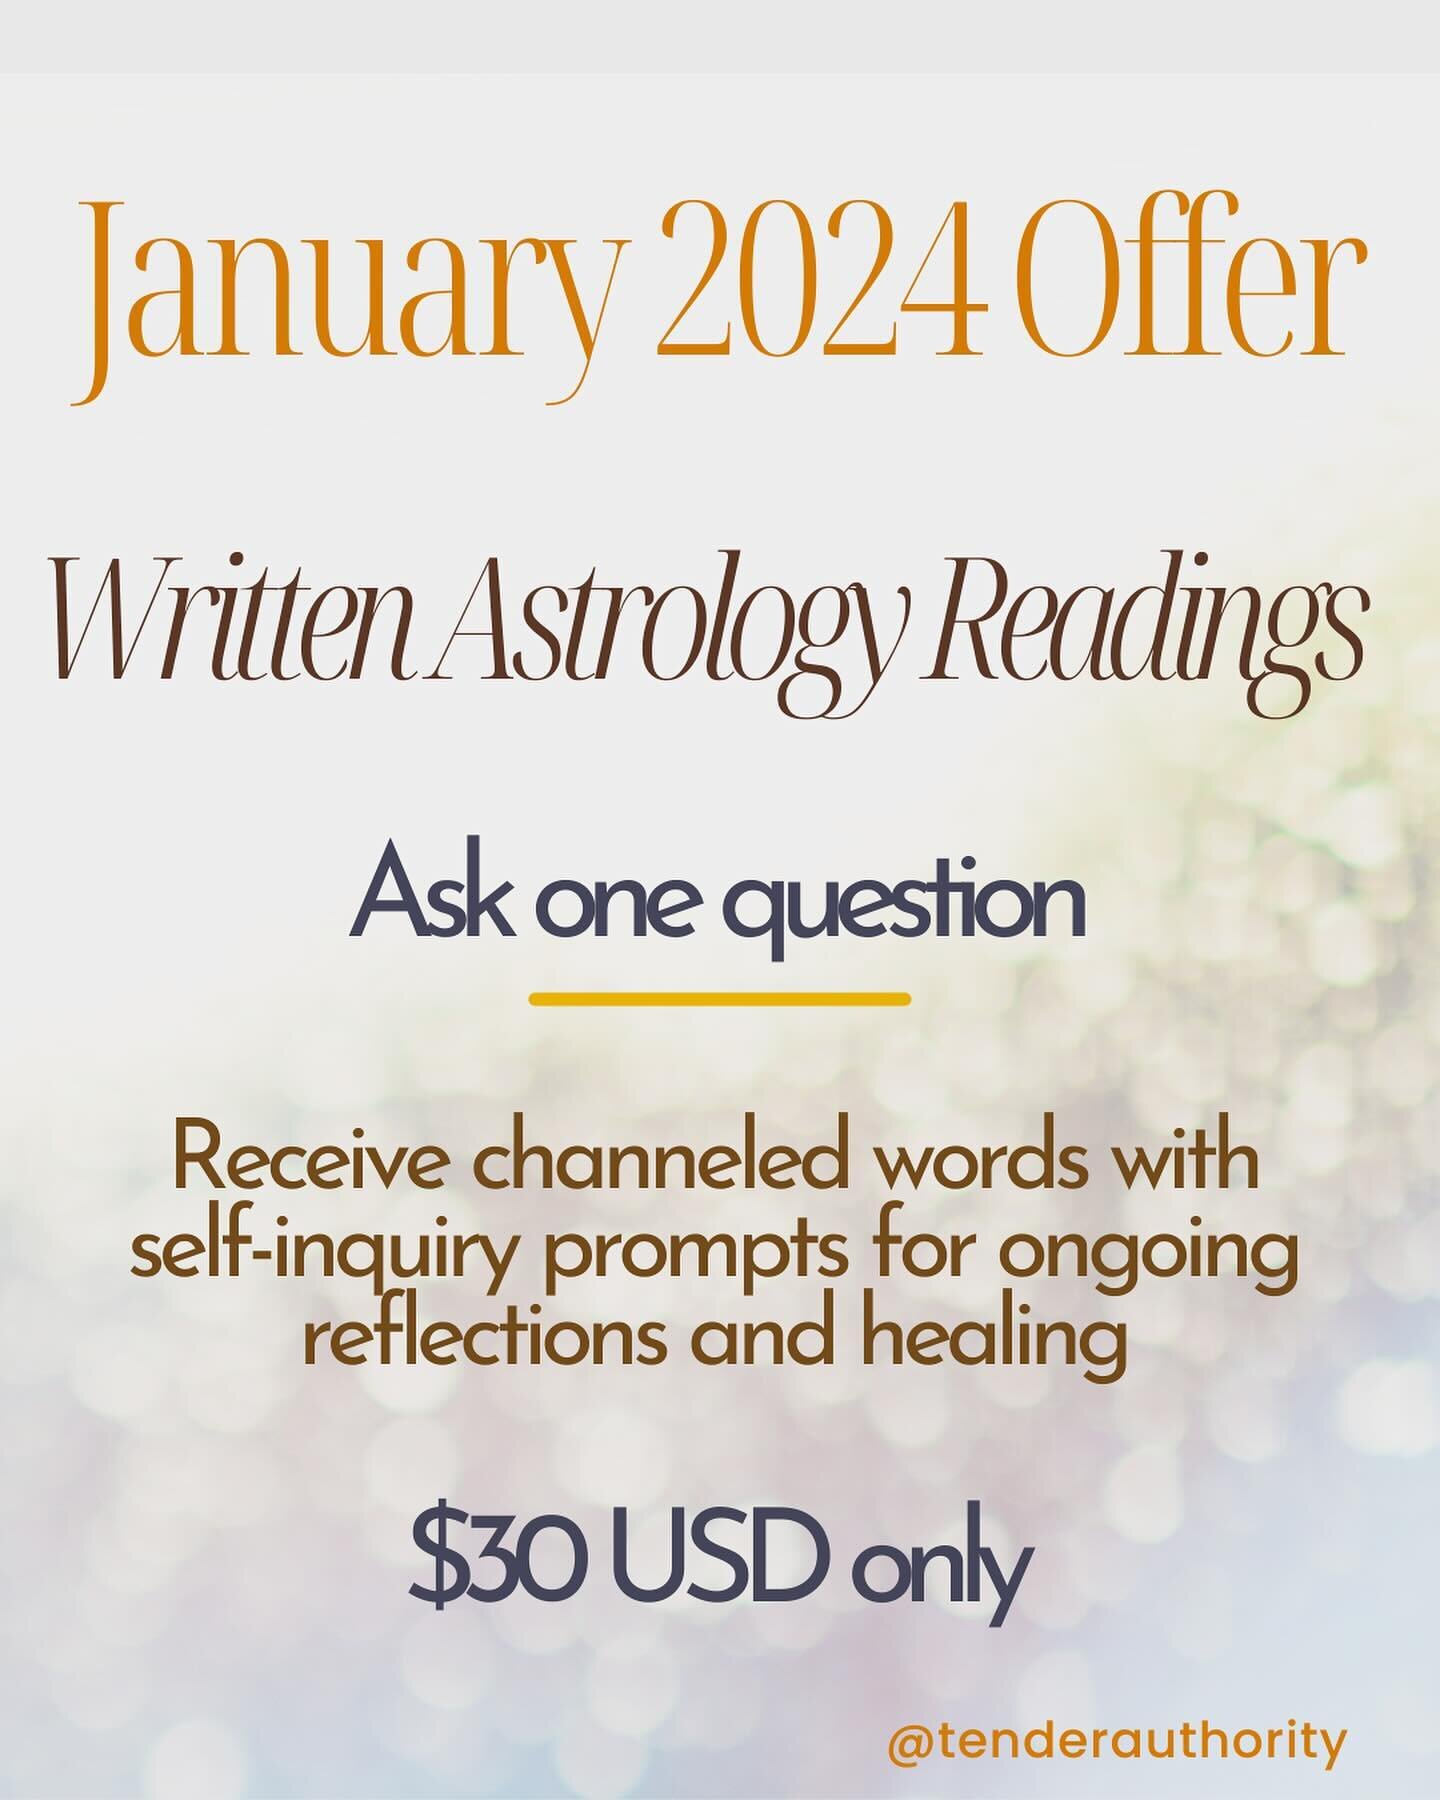 Whatever it is that you maybe grappling with, it&rsquo;s a perfect time to gain some insight and self-inquiry prompts on how to deal with a life question - whether in purpose, work, love or social.

This offer is available all of January.

You can pu